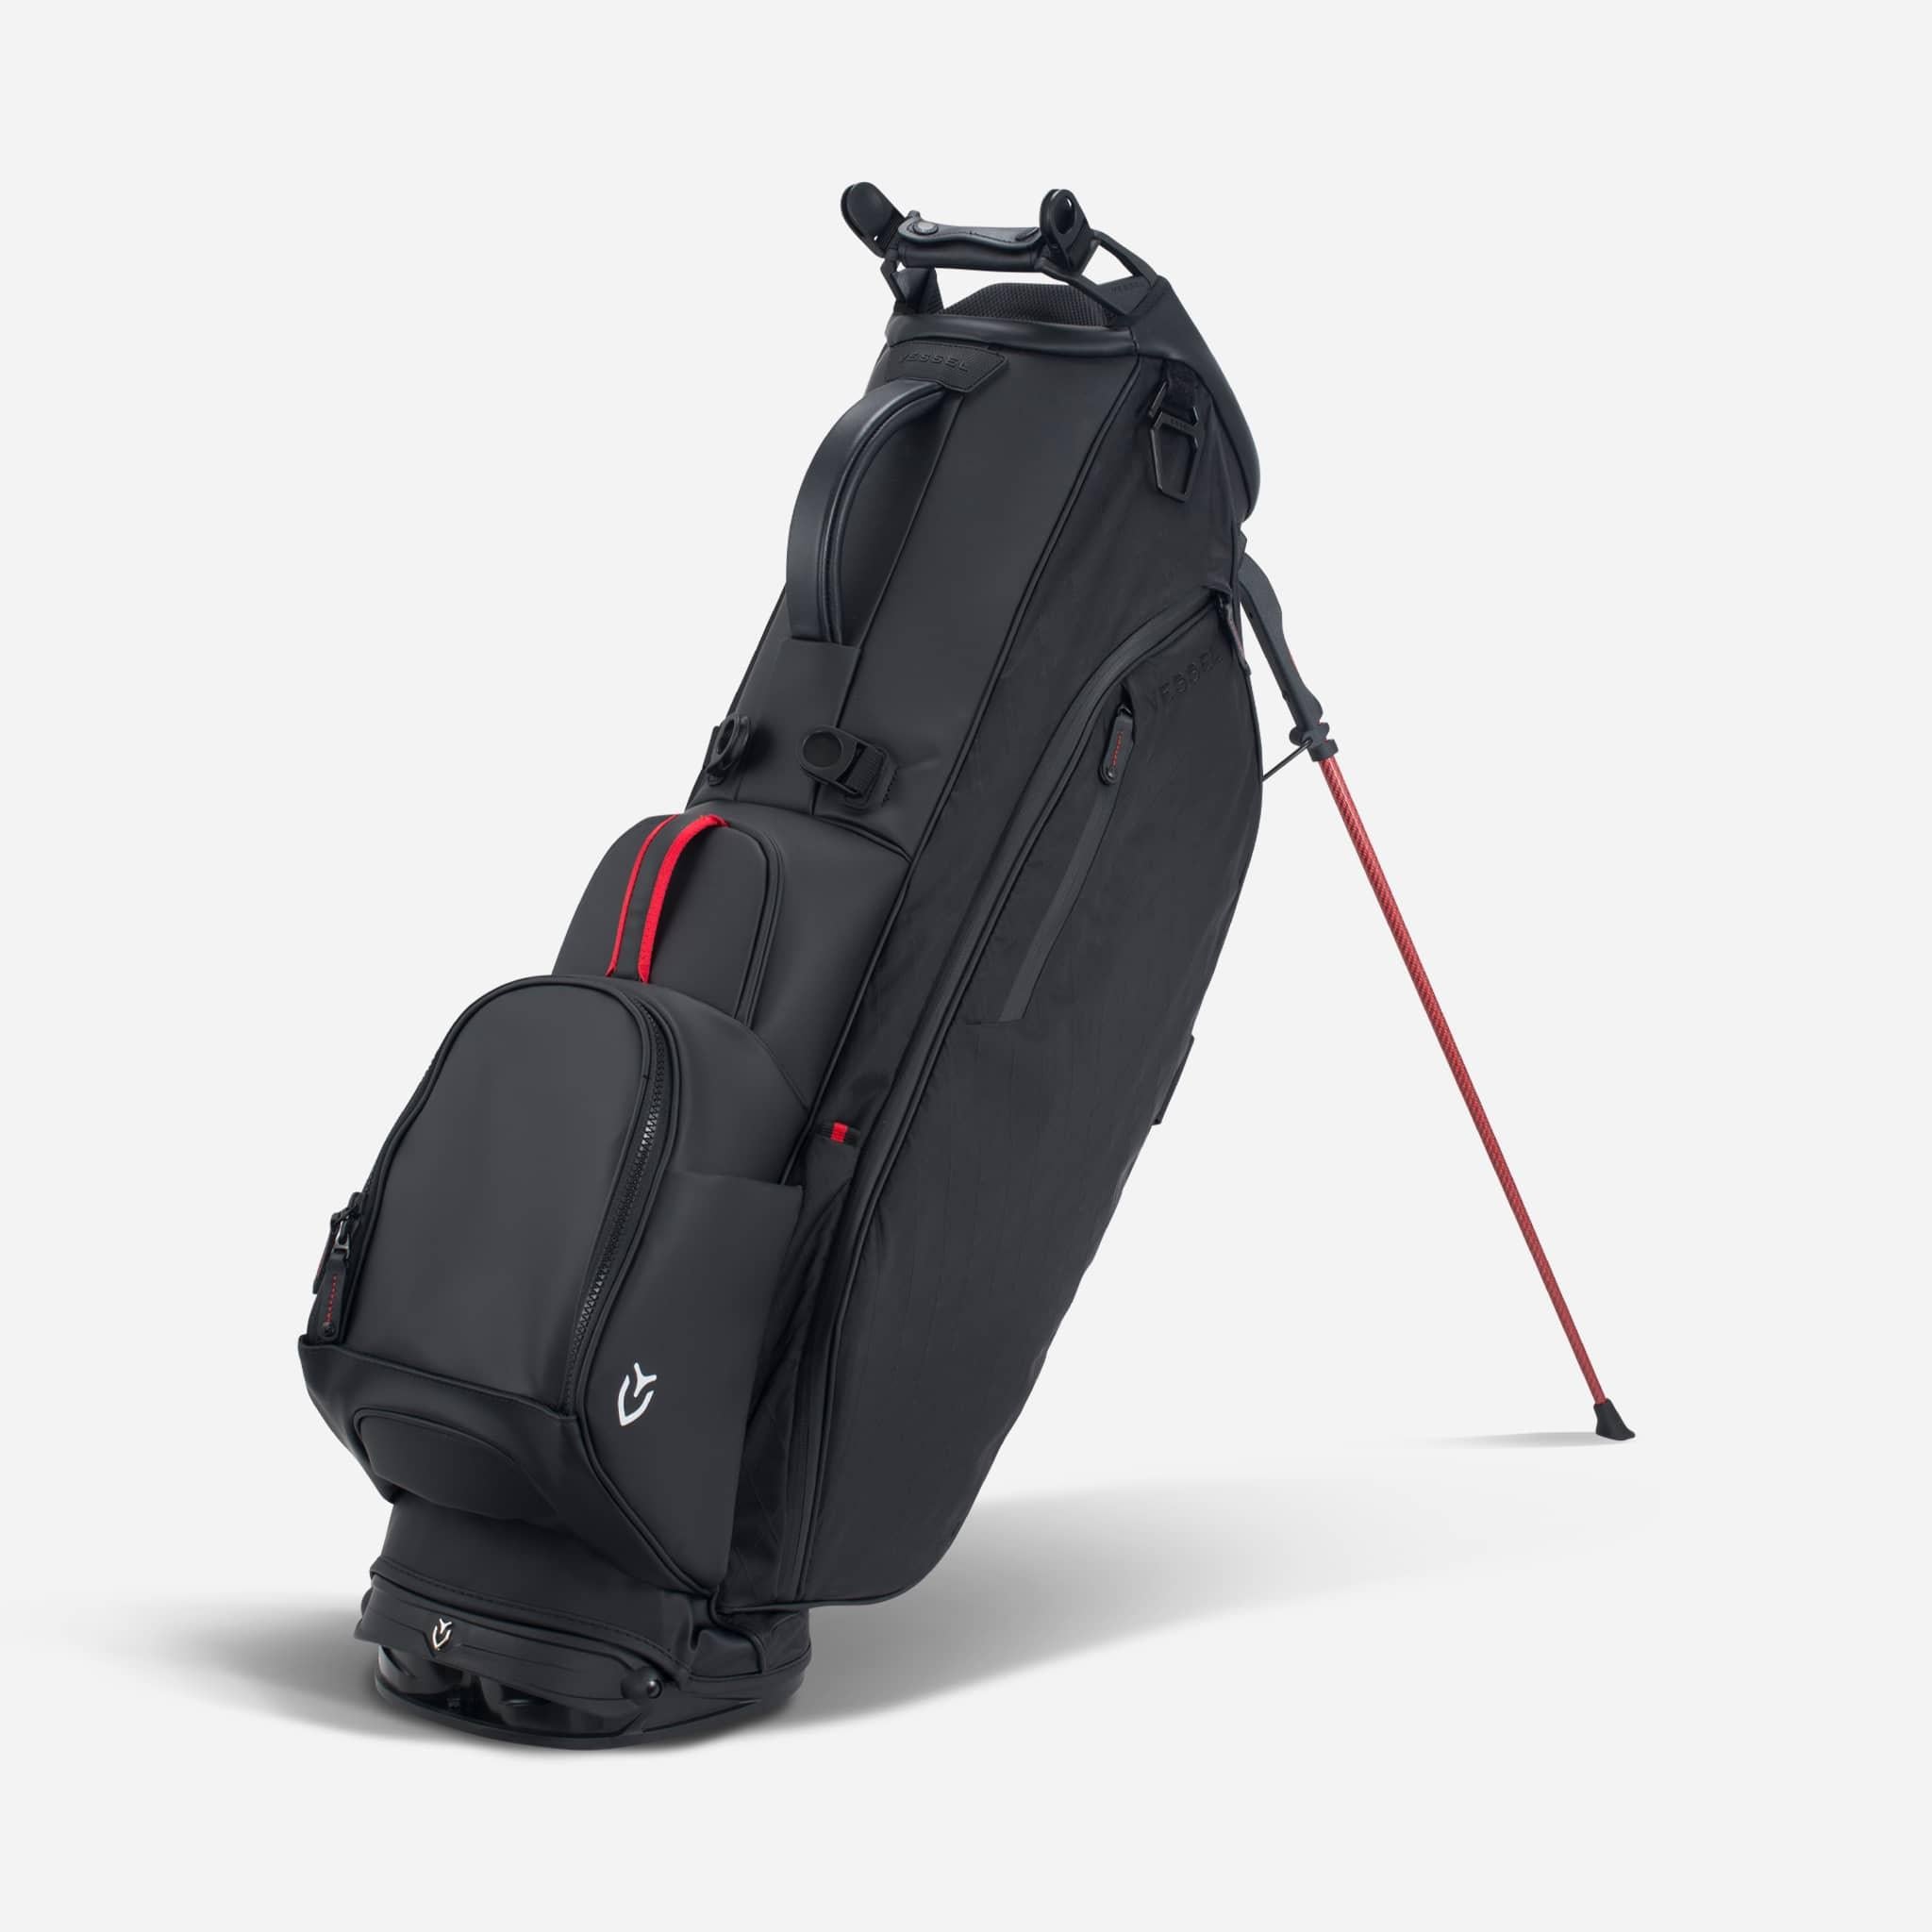 Vessel Player III Golf Bag Review - Plugged In Golf